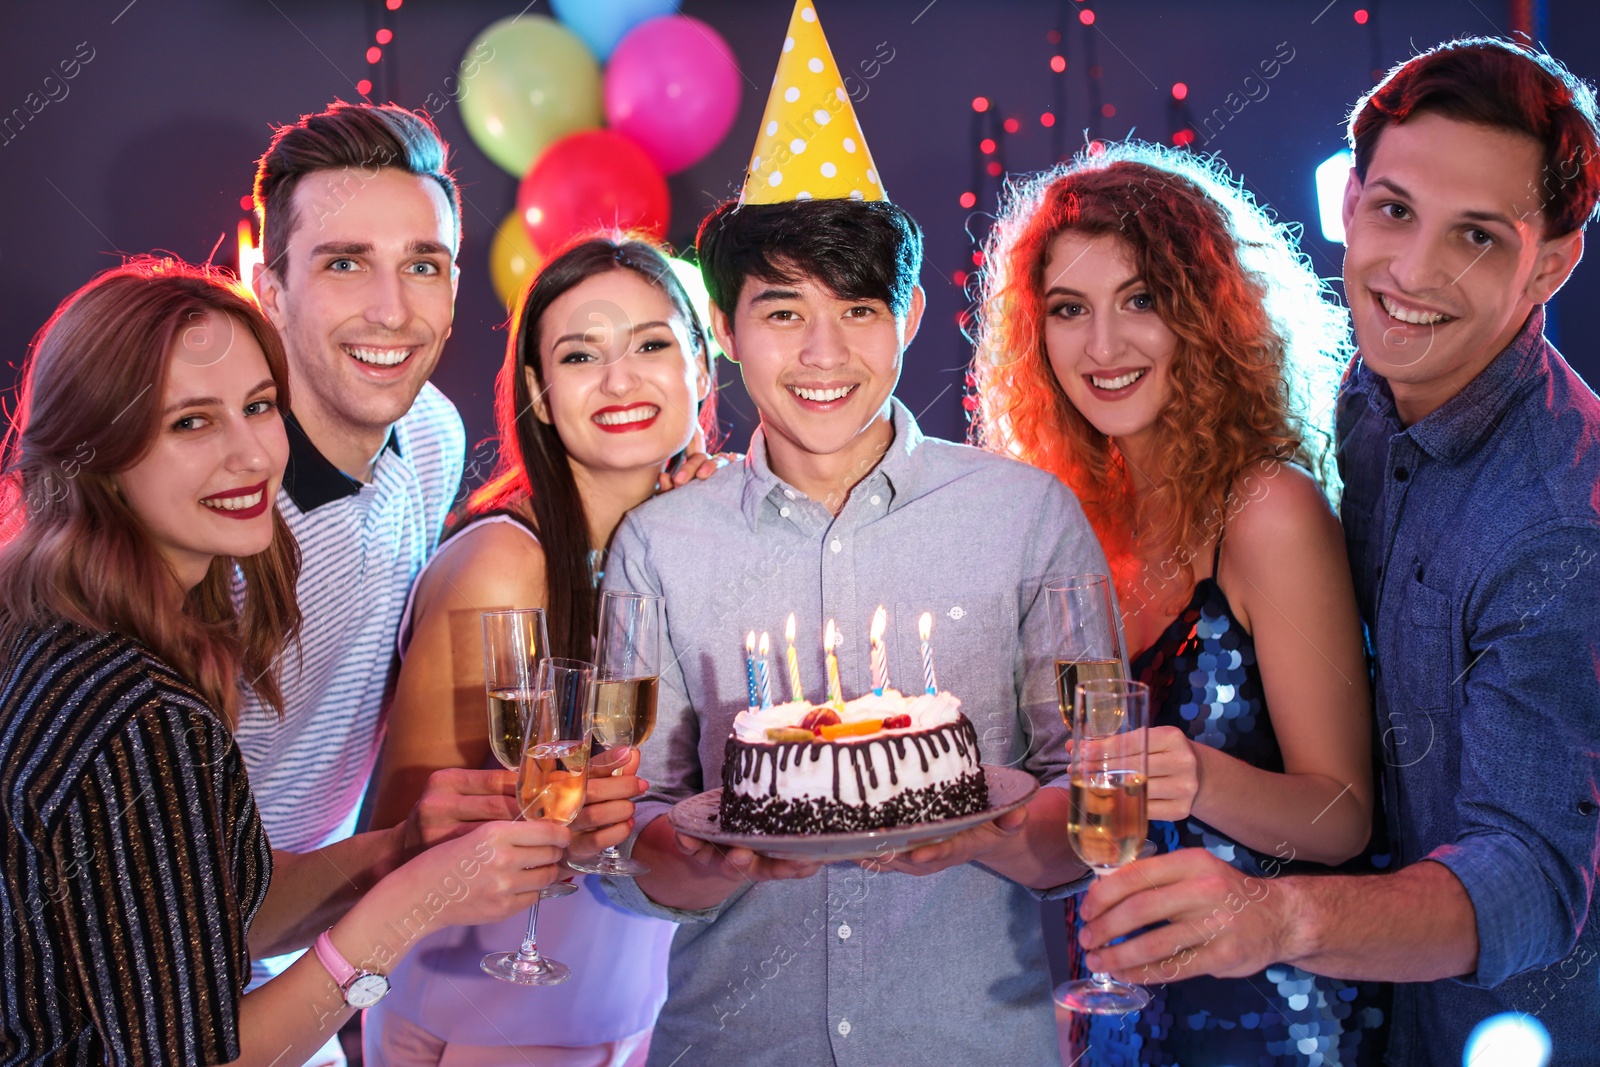 Photo of Young people celebrating birthday with cake in nightclub